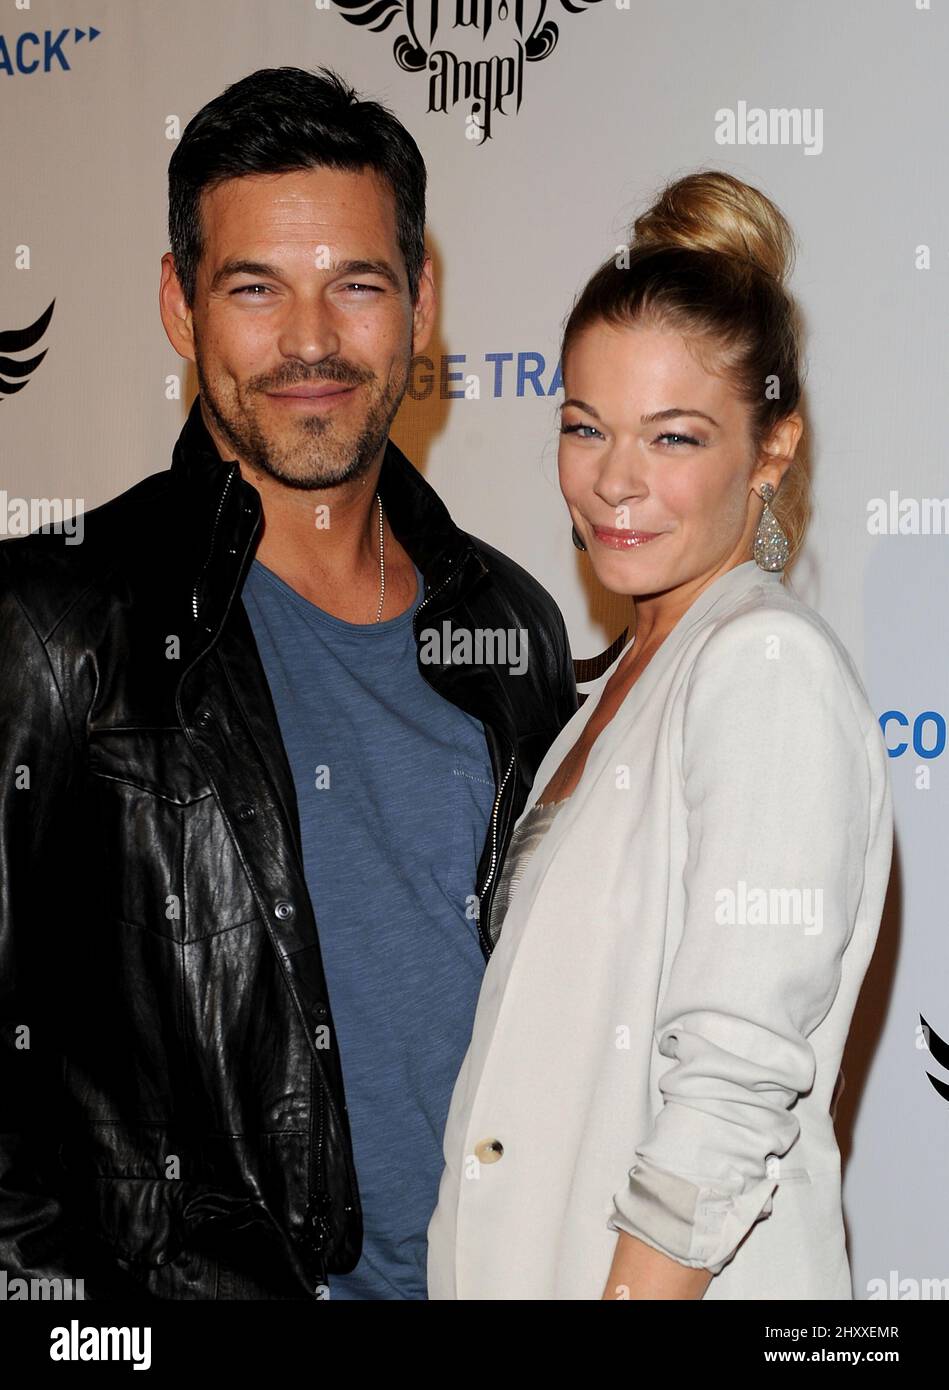 Eddie Cibrian and LeAnn Rimes at the 2012 TRANS4M i.am.angel Grammy Event held at the Palladium in Hollywood, Ca. Stock Photo